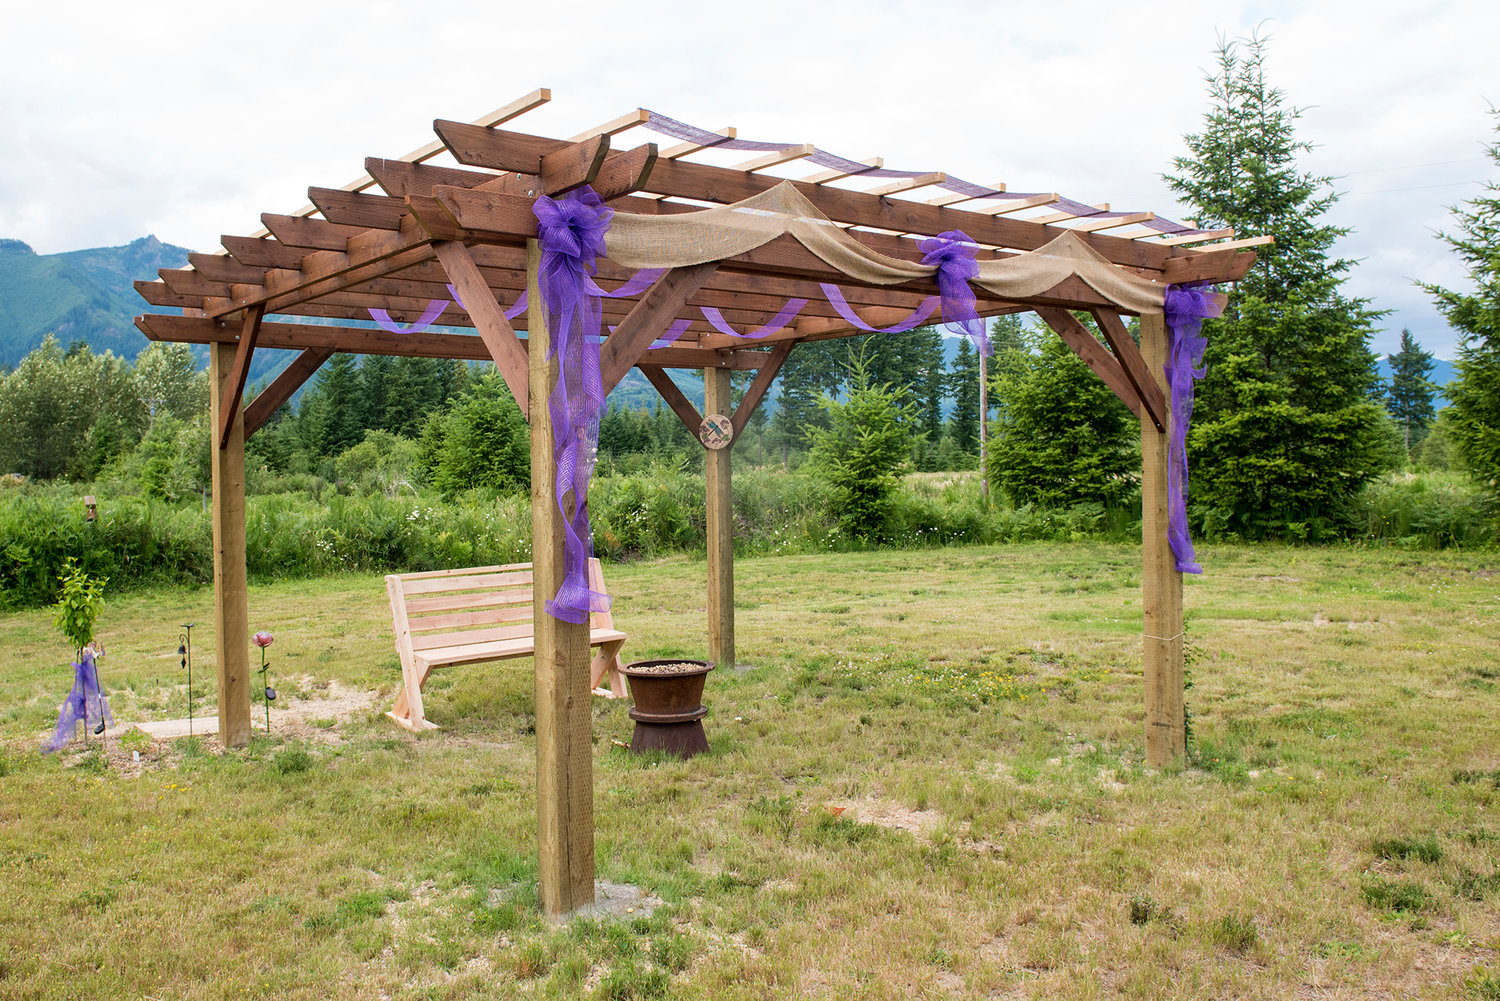 Justin Claibourn built a pergola and sitting area at the back of the Cowlitz Falls Lavender Farm in honor of his late mother, who owned the land along with Justin himself, his father Tim and Justin’s wife, Jordann.